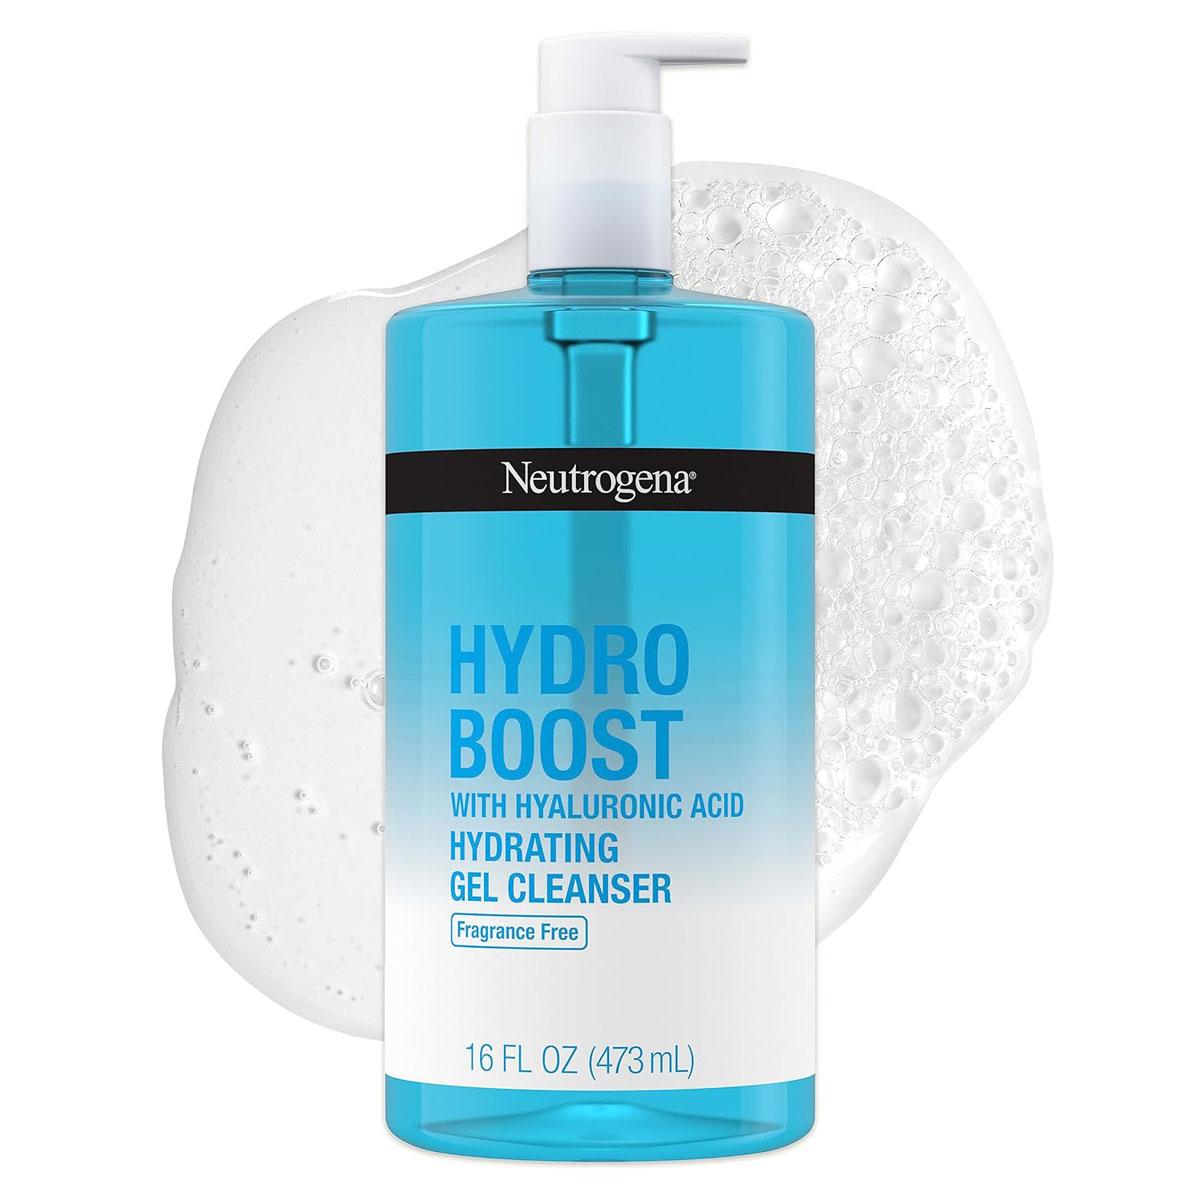 Neutrogena Hydro Boost Hydrating Gel Facial Cleanser for $8.54 Shipped